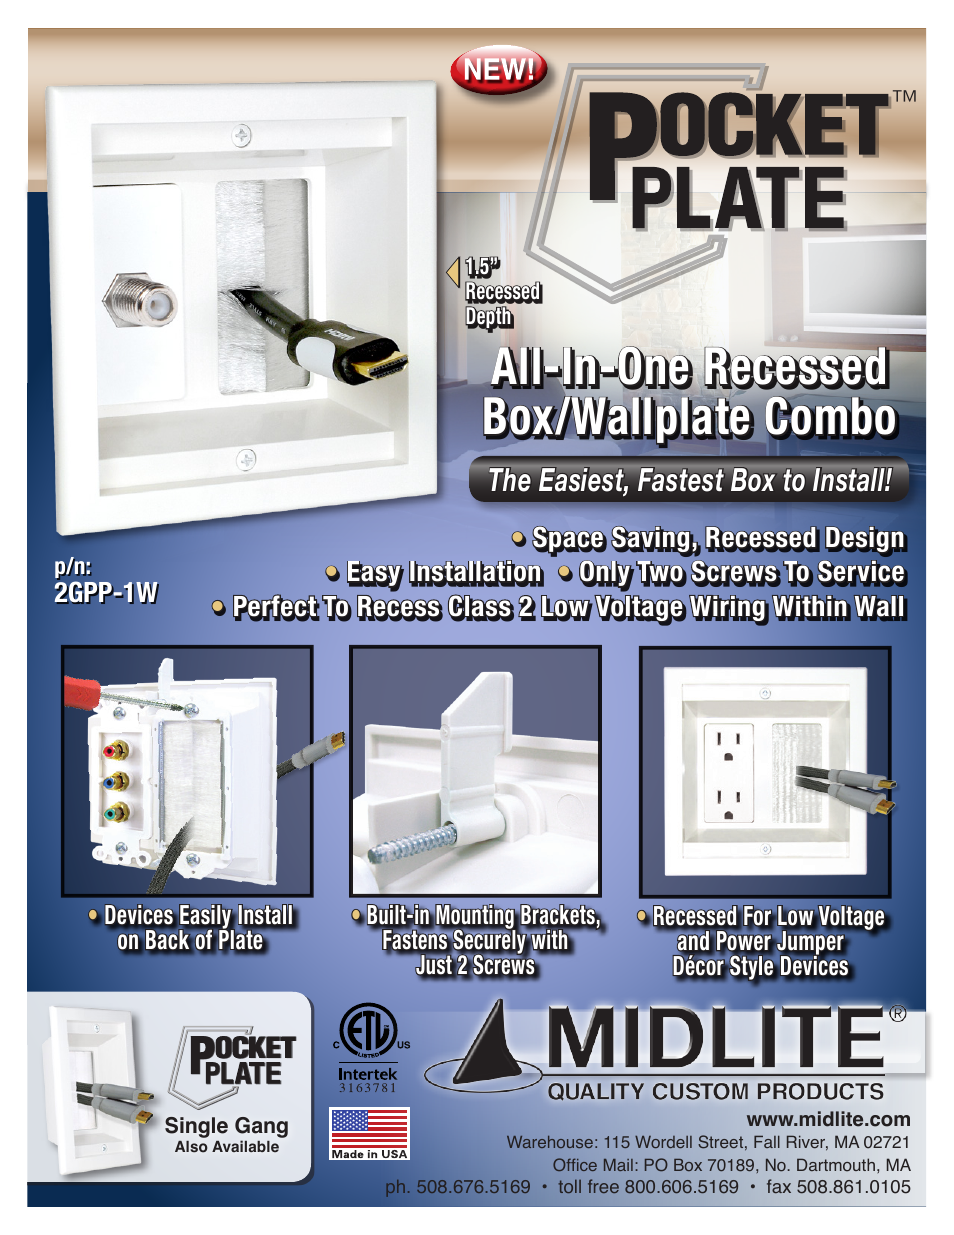 POCKET PLATE ALL-IN-ONE RECESSED BOX_WALLPLATE COMBO - DOUBLE GANG